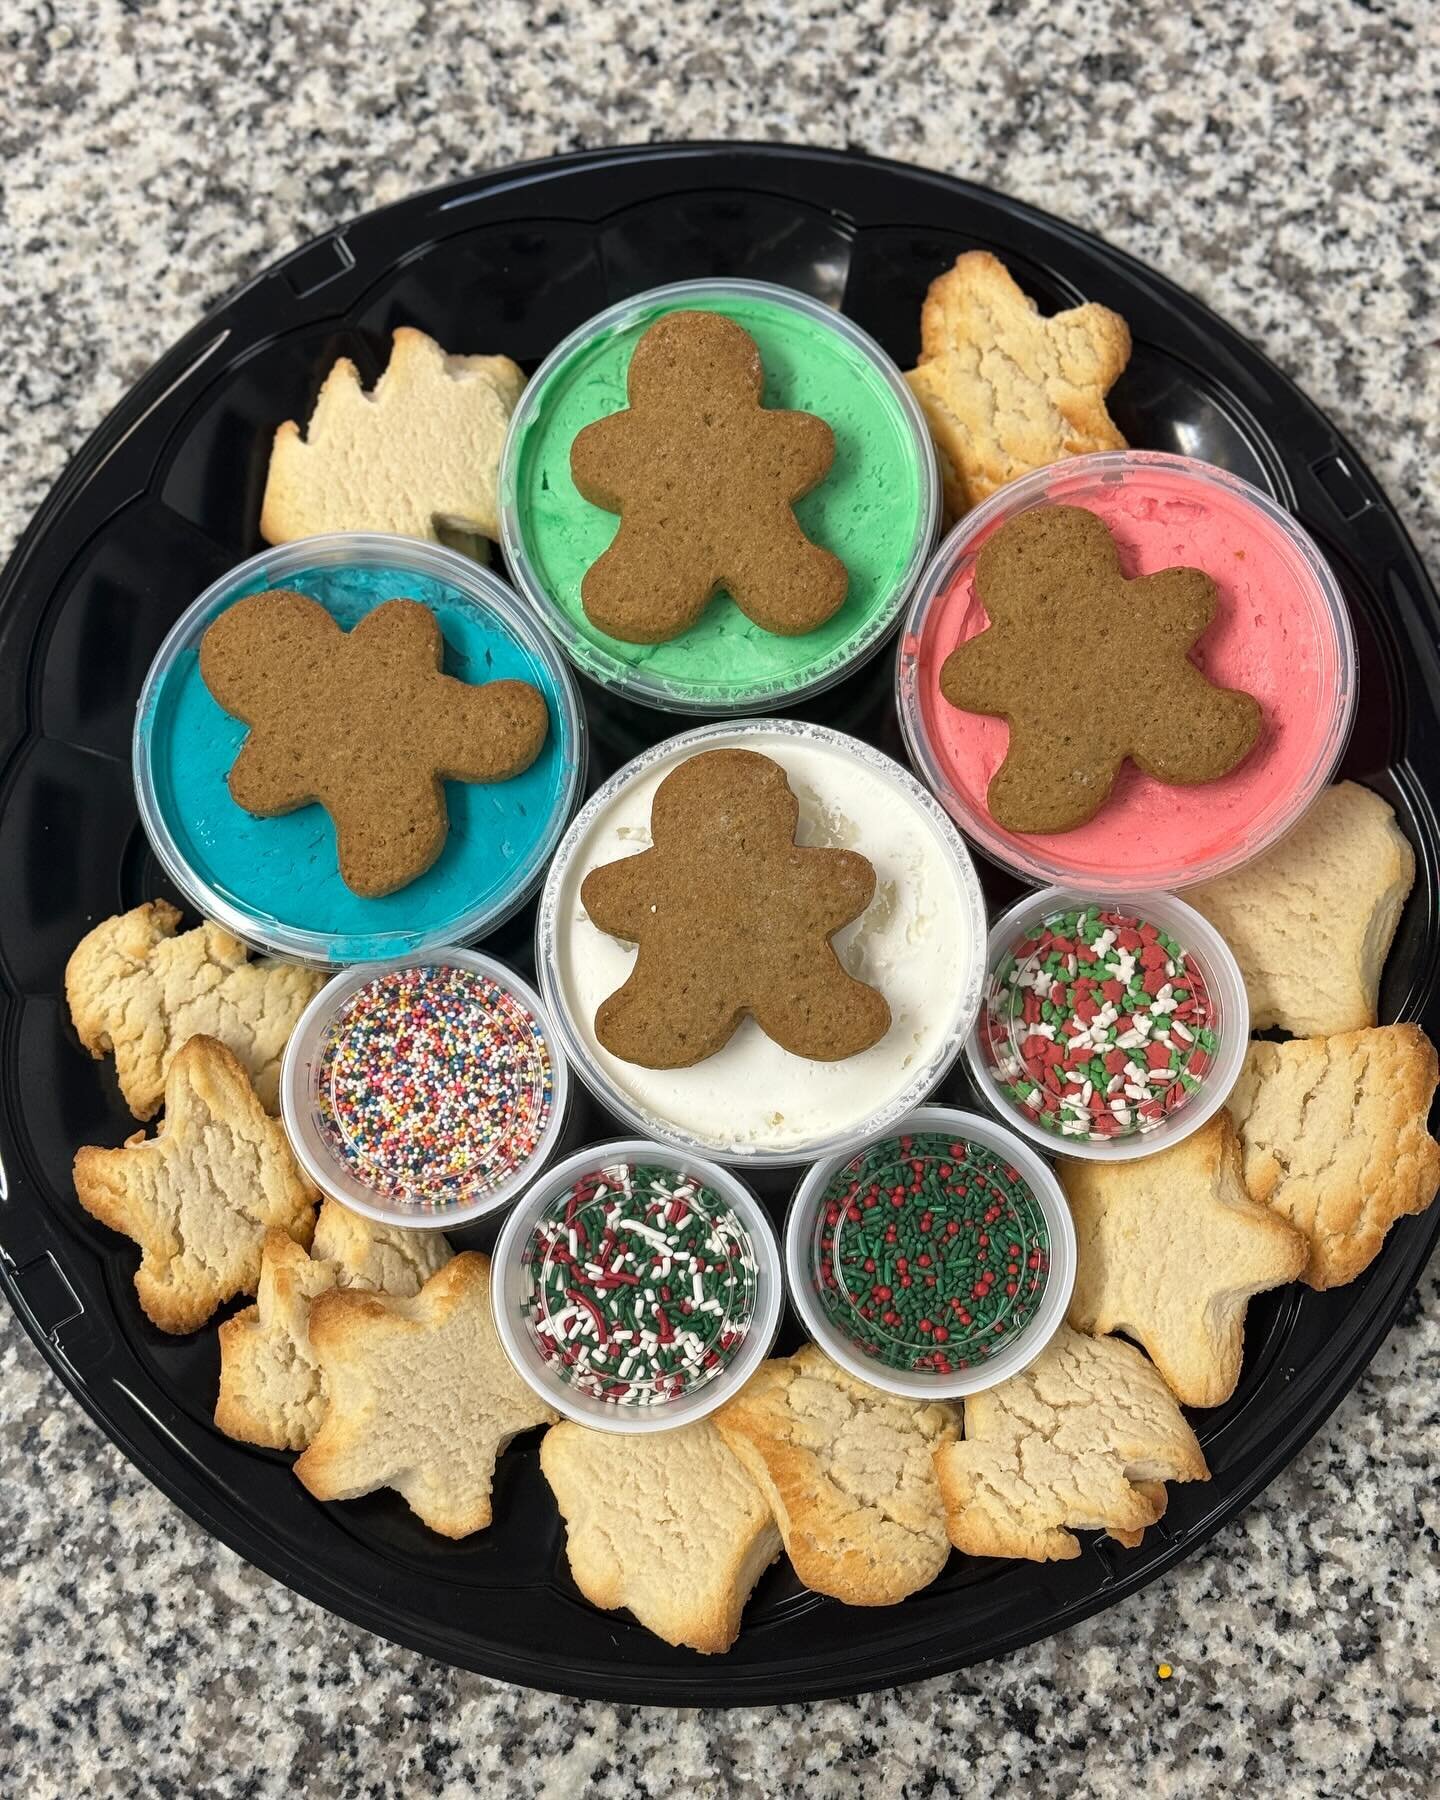 #christmas #cookies #take and decorate #kits 
 Call ahead to schedule your pick up or delivery